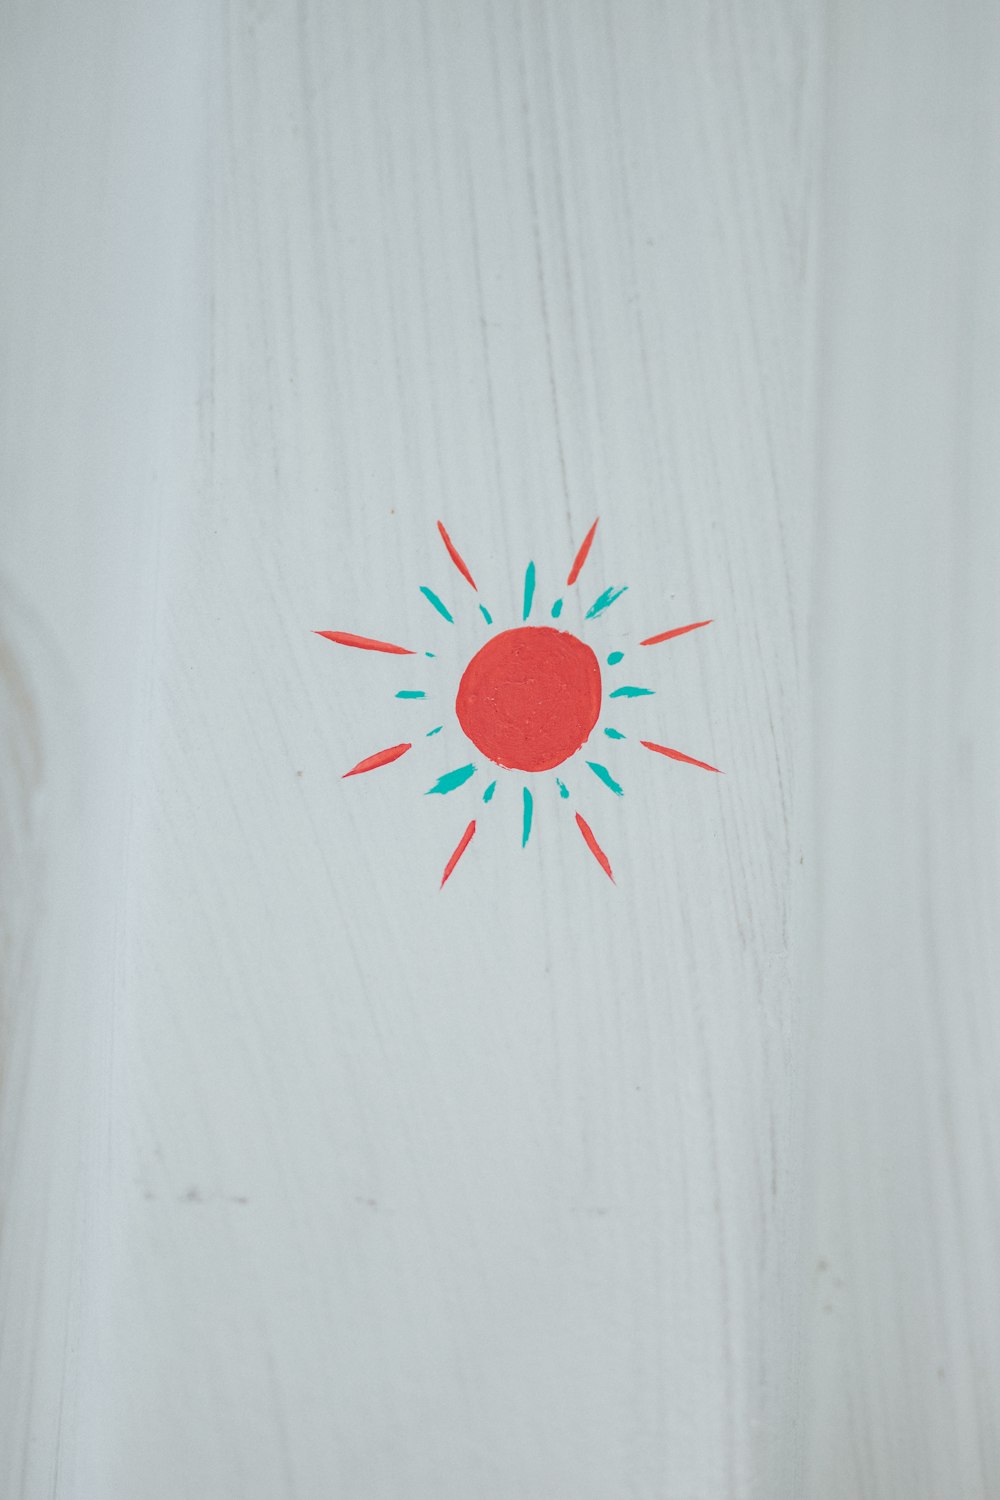 red round ornament on white wooden surface